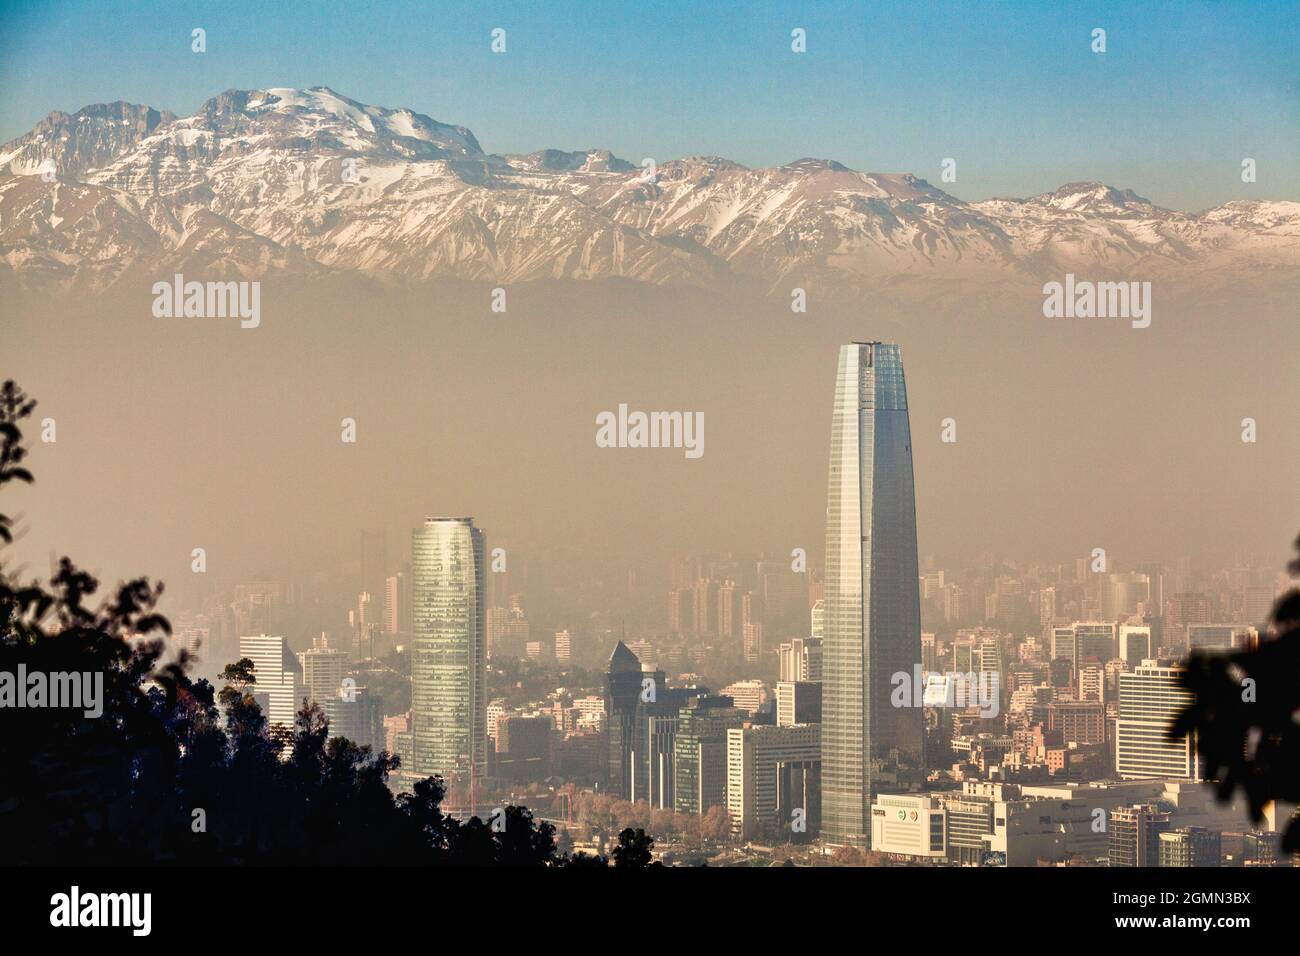 El Gran Torre in the city of Santiago de Chile is Latin America's newest tallest building and second tallest in the Southern Hemisphere. Stock Photo